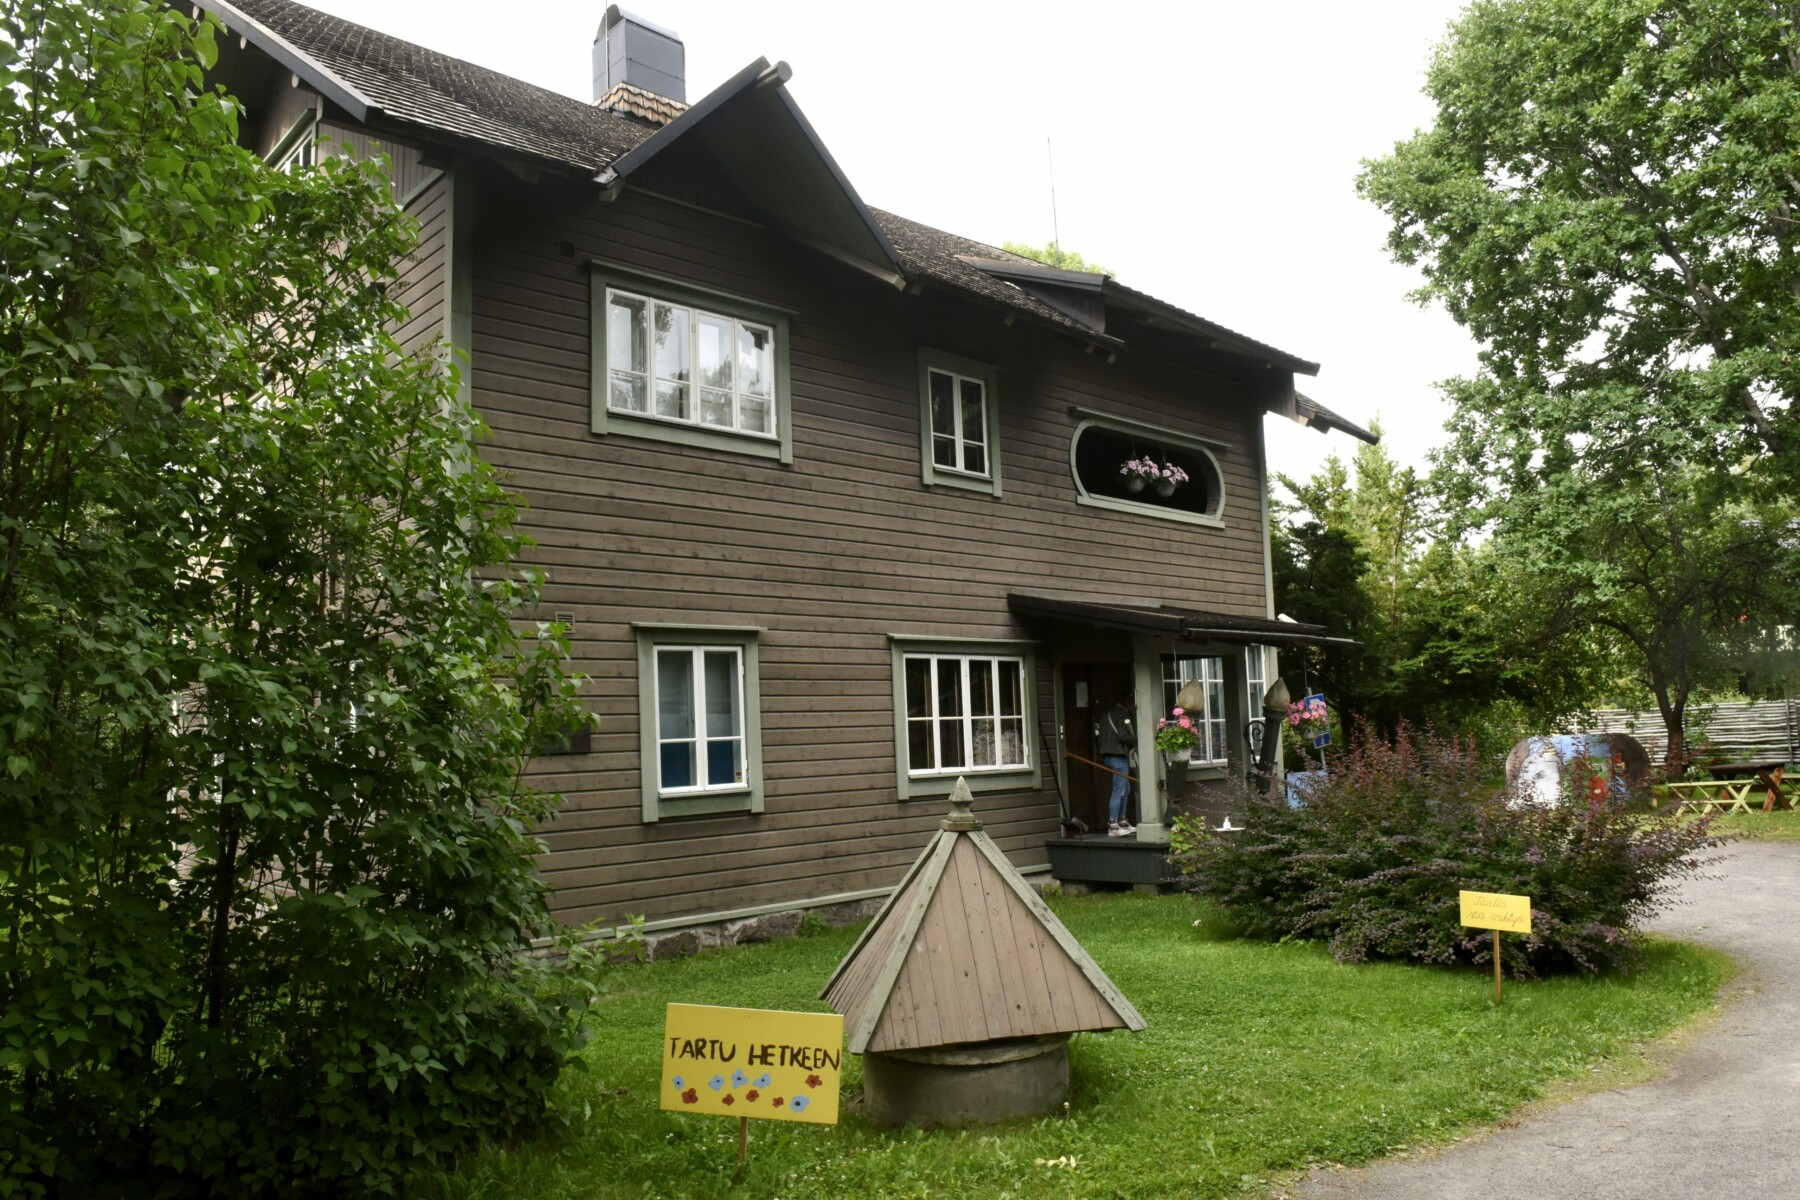 An old-fashioned brown wooden house is flanked by trees.